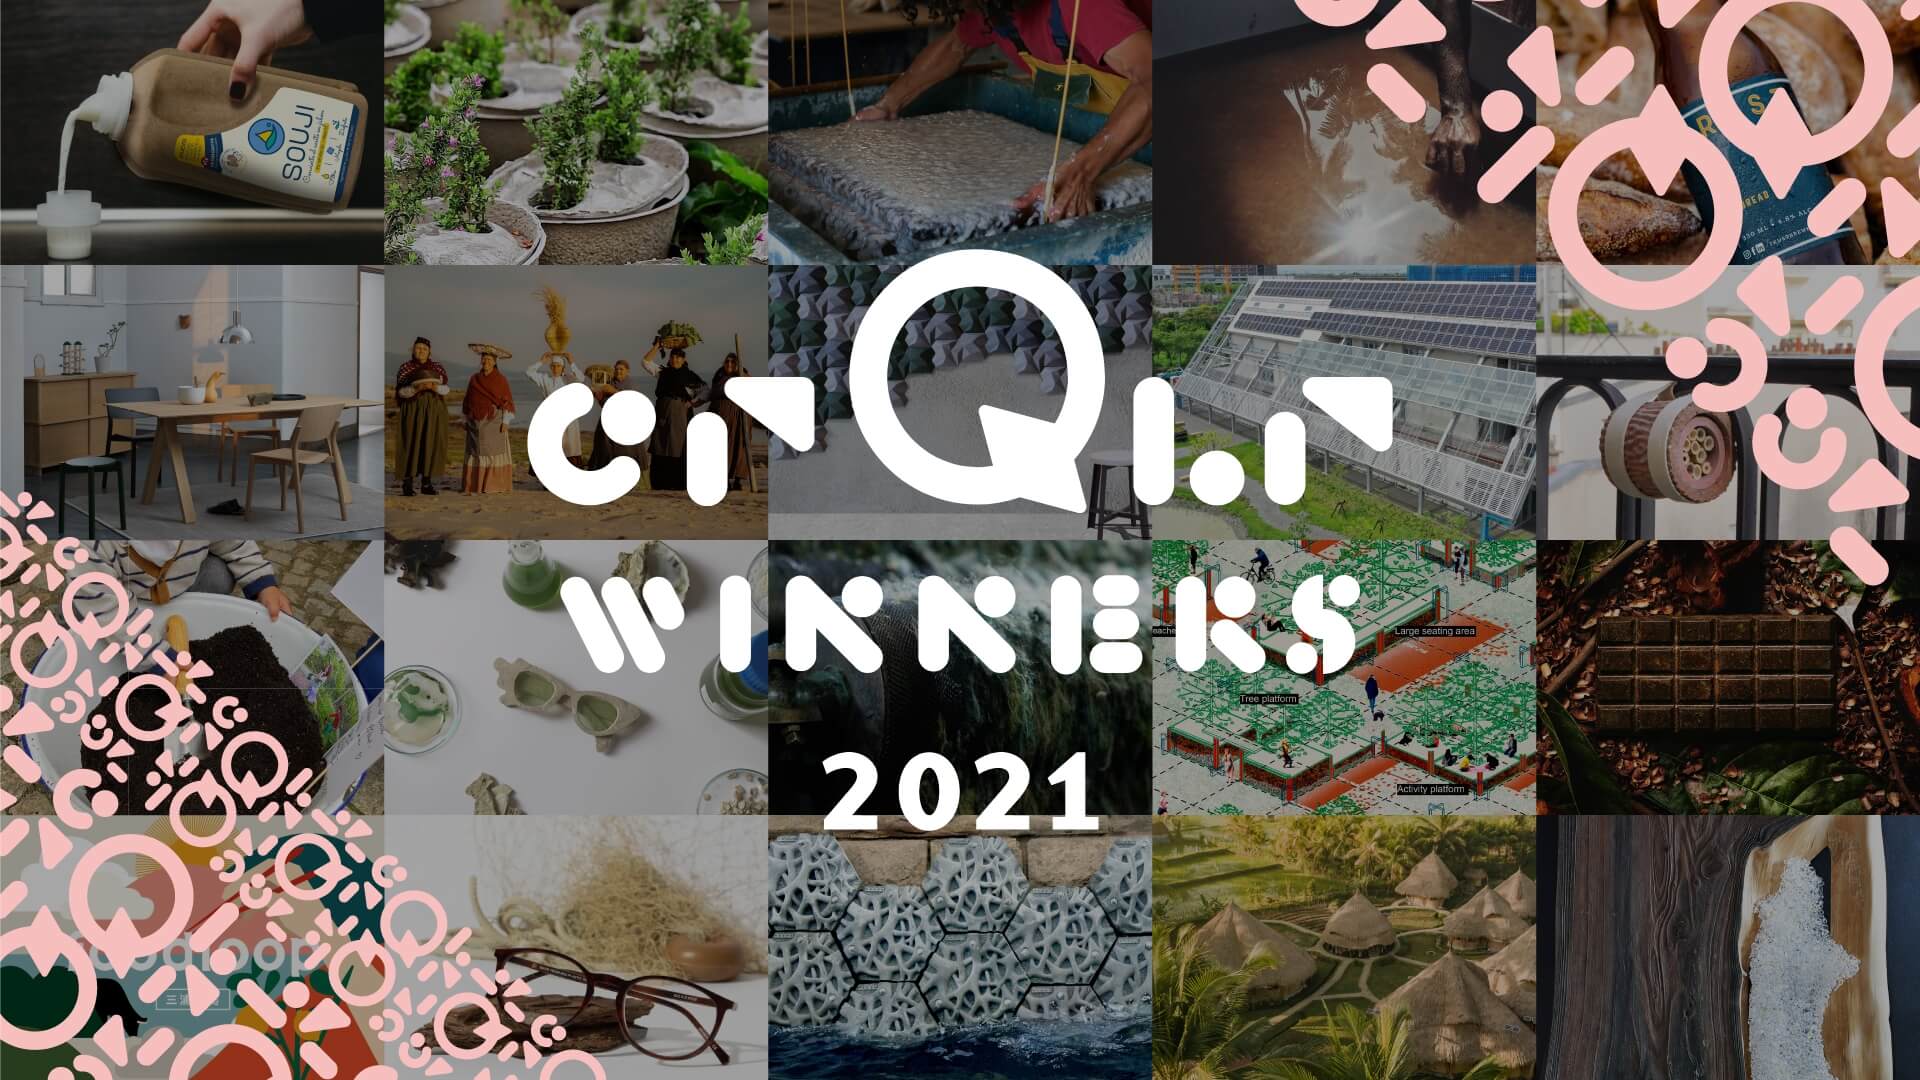 crQlr Awards 2021 Overview